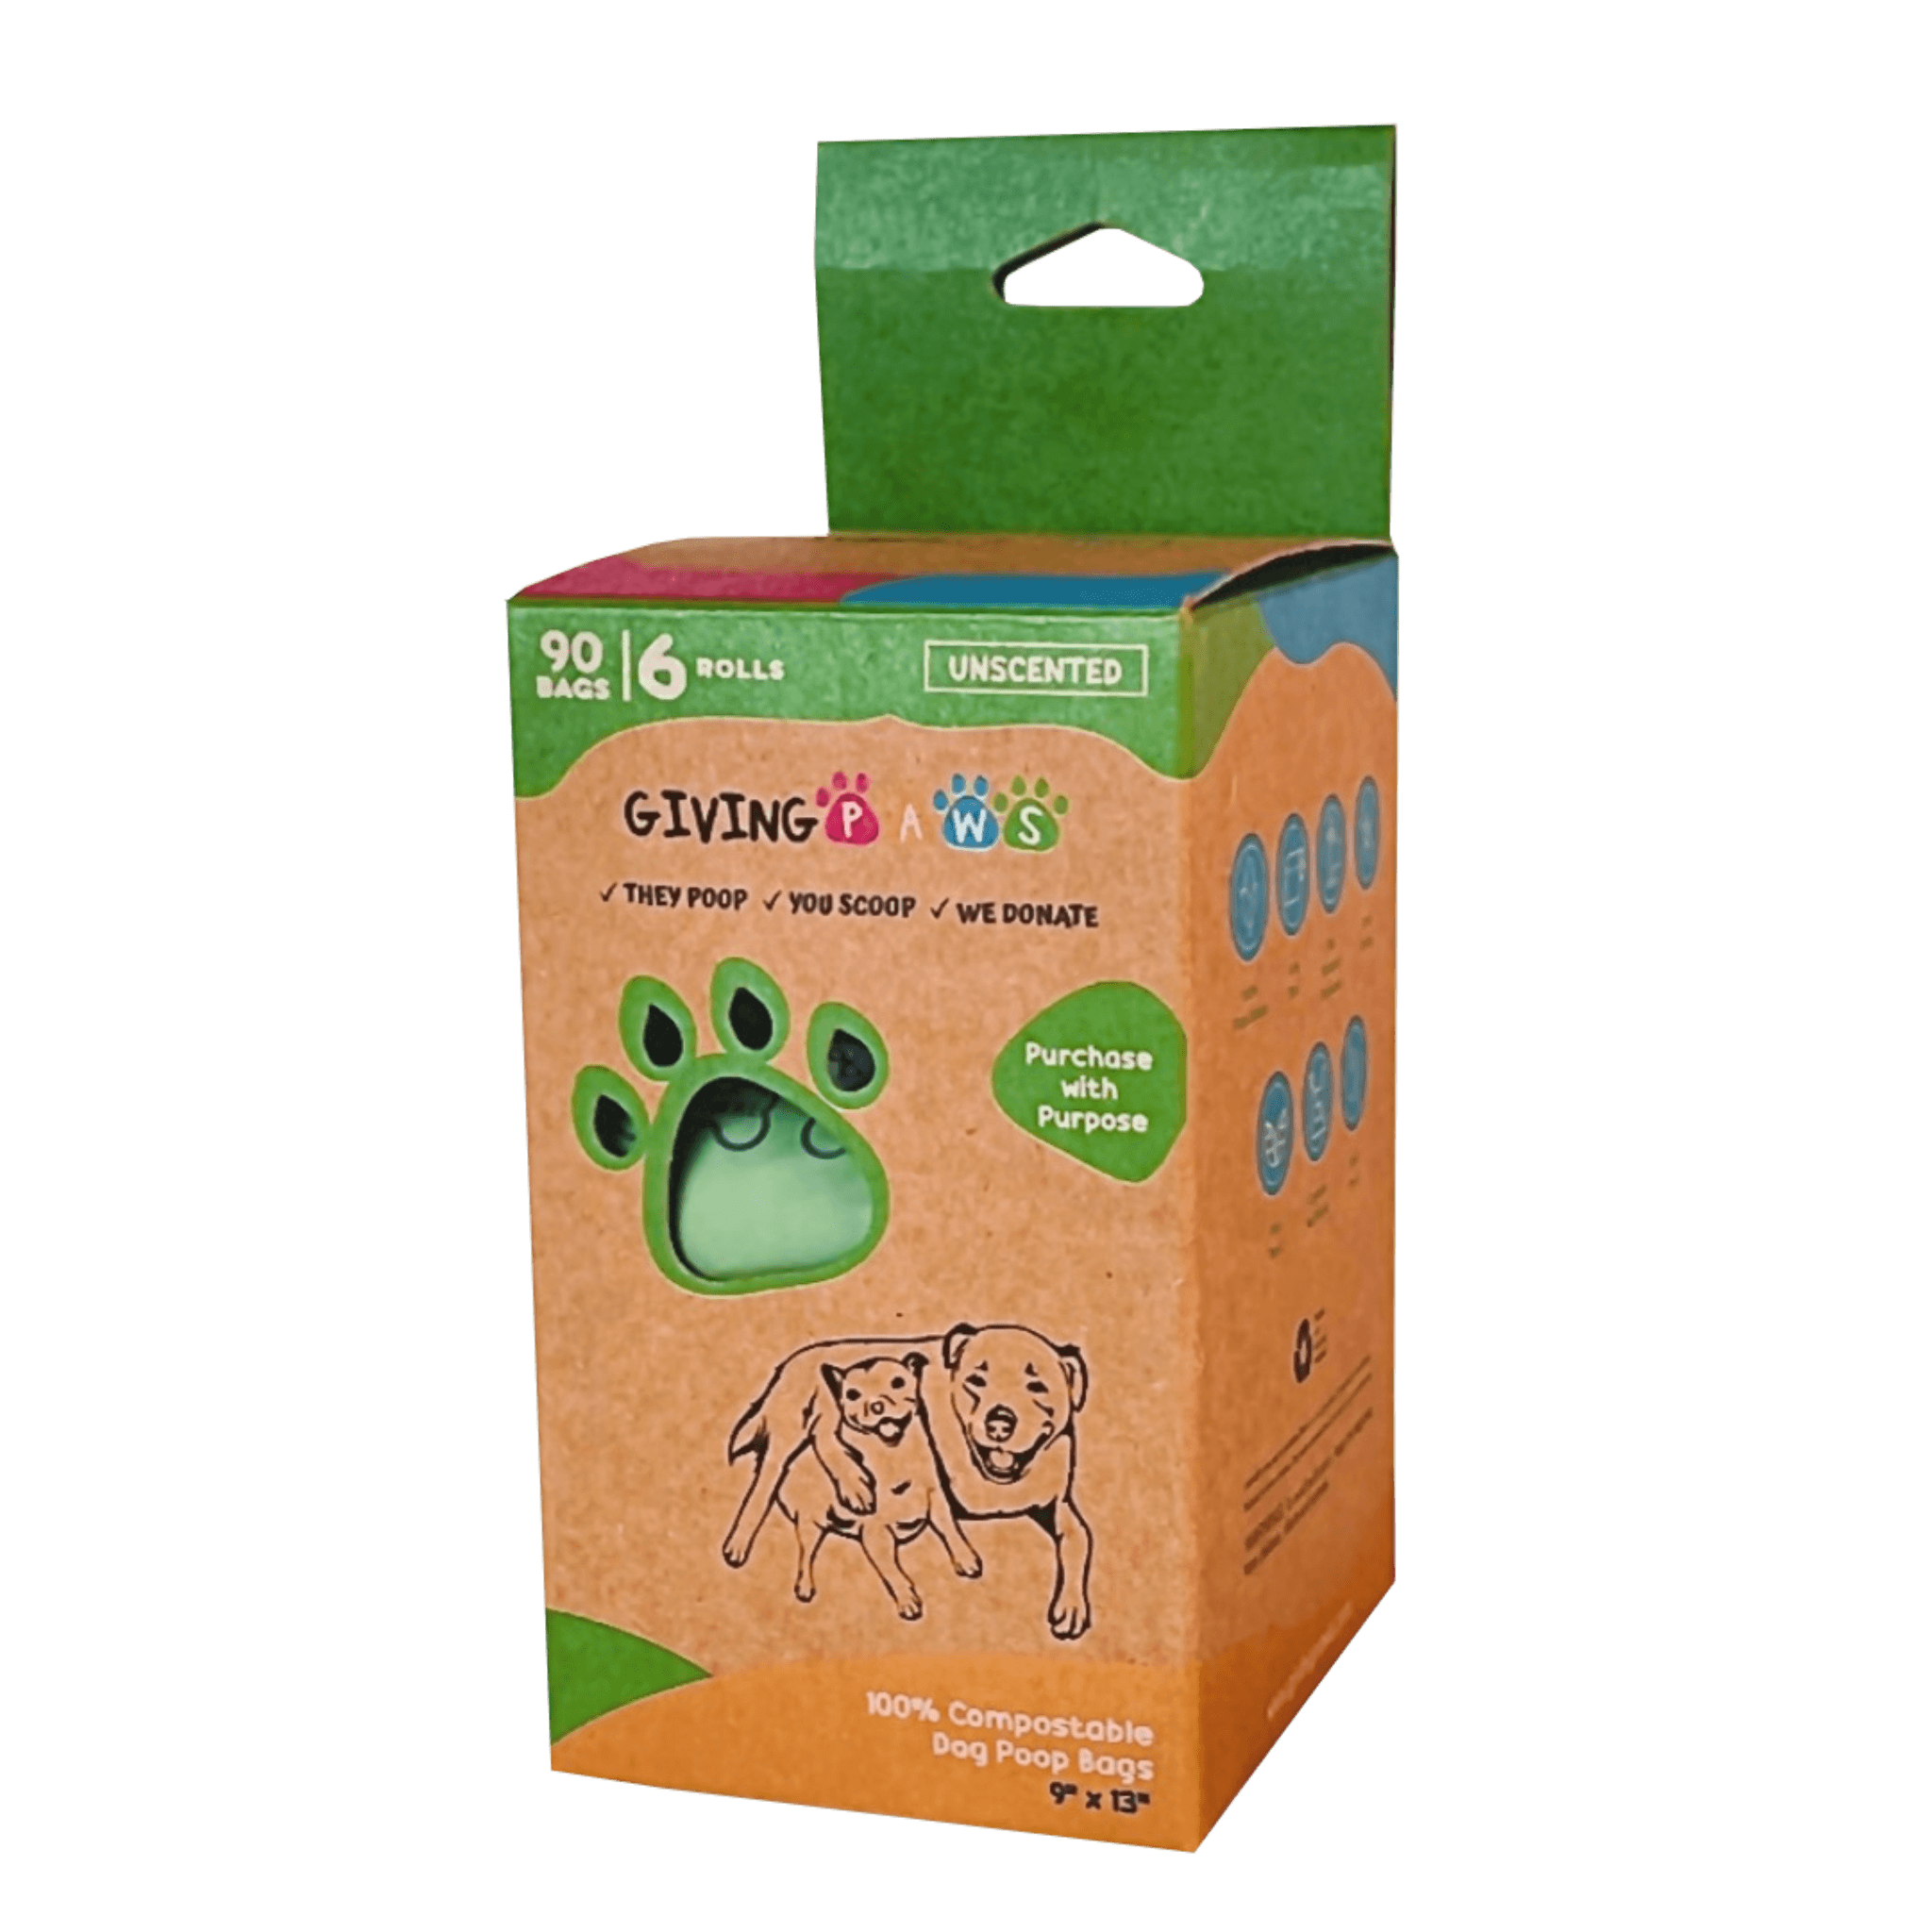 Compostable Dog Poop Bags (90 ct) - Image 0